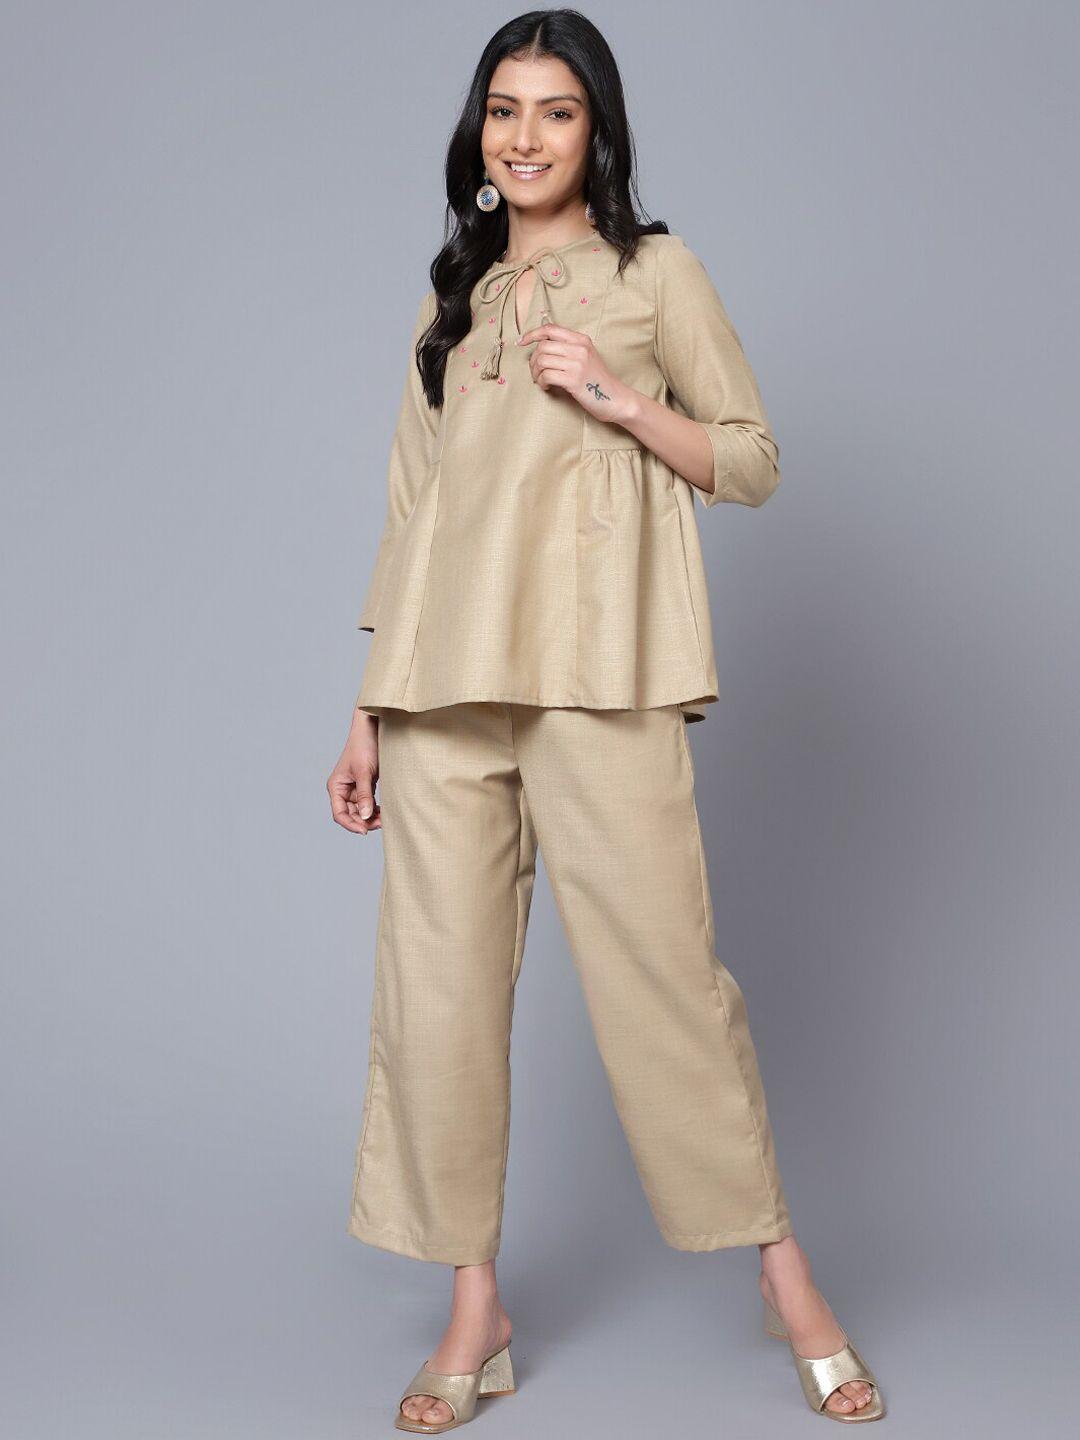 baesd embroiderd top with trousers co-ords